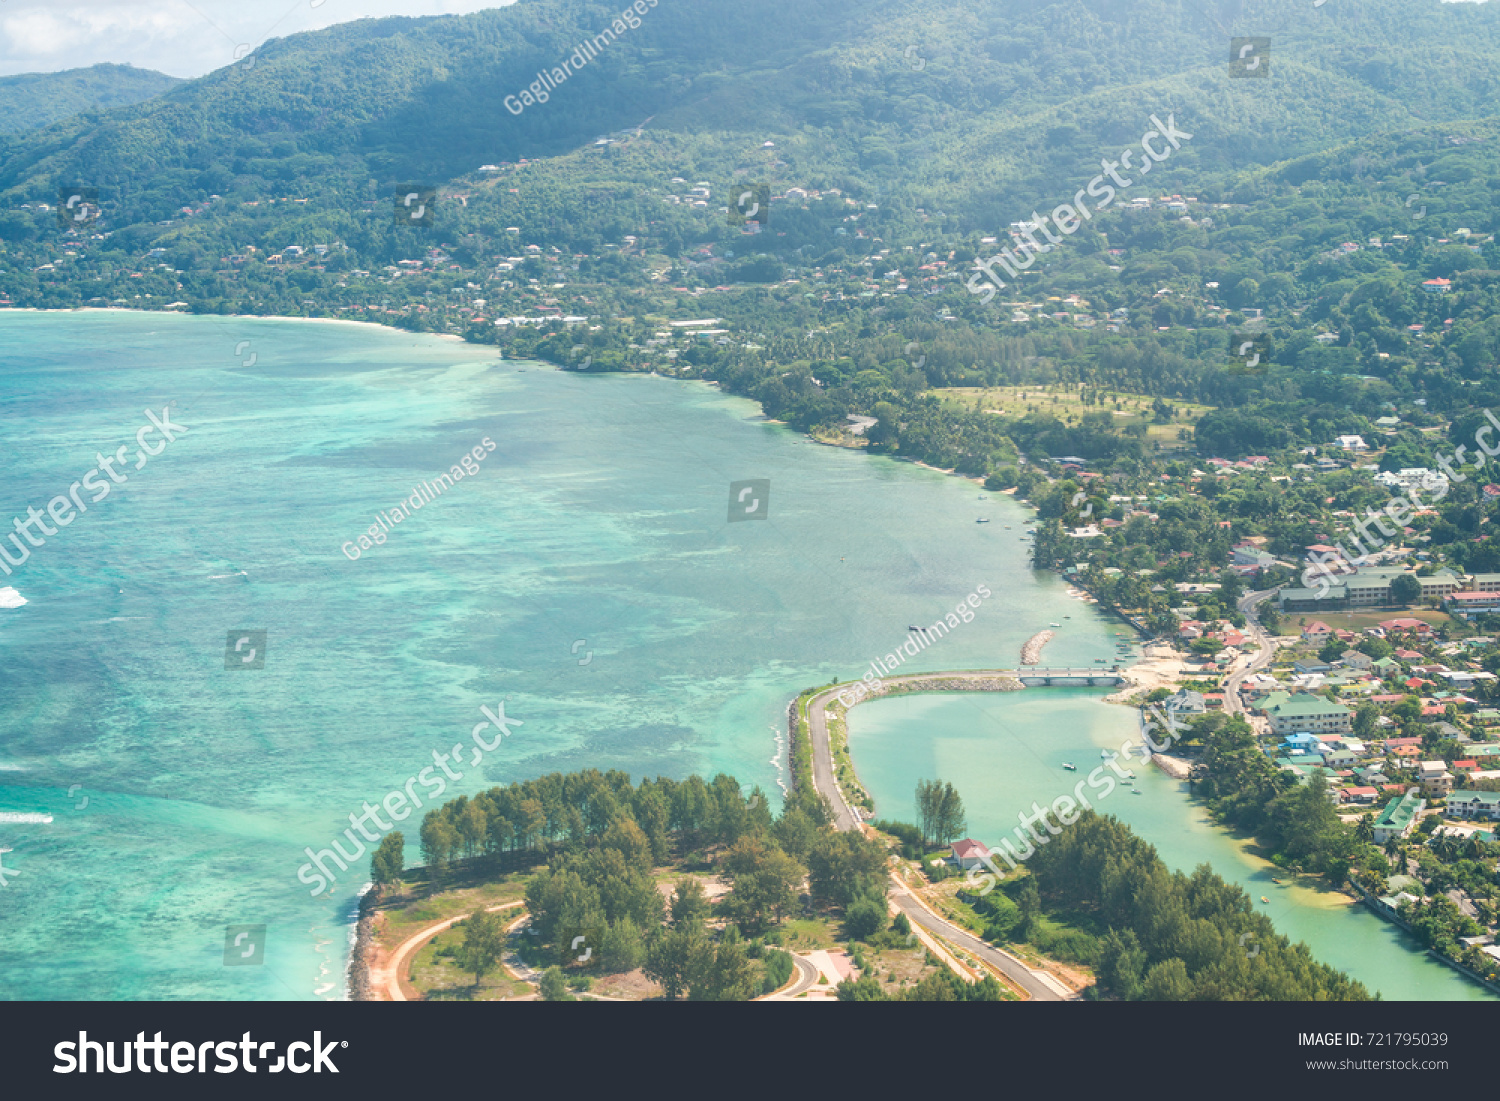 Mahe aerial view from airplane, Seychelles. #721795039